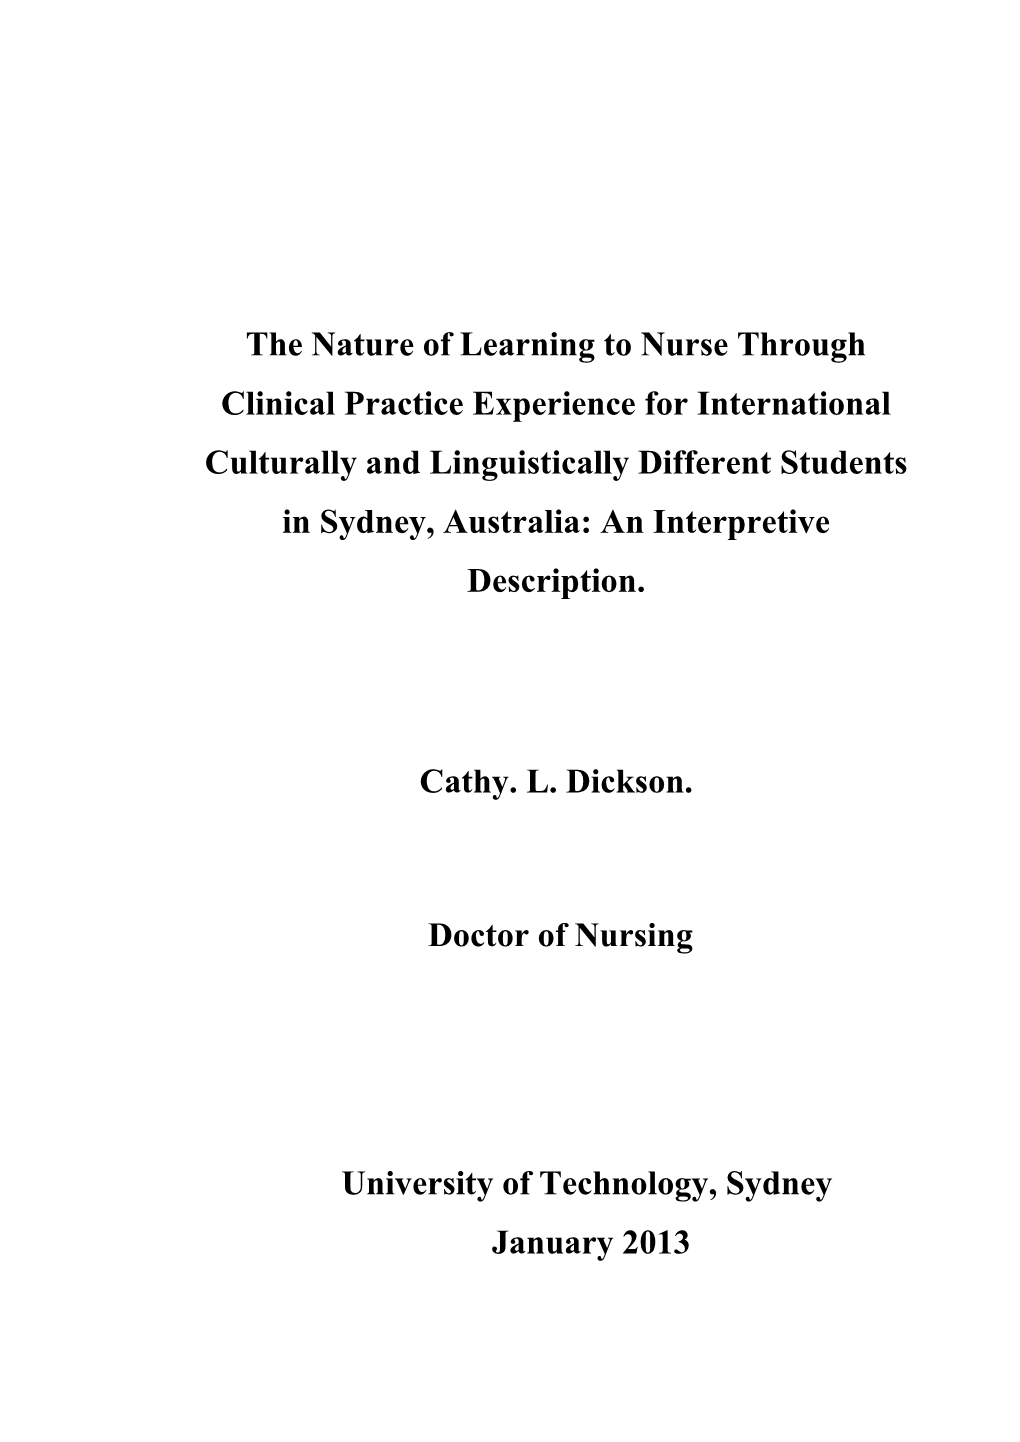 The Nature of Learning to Nurse Through Clinical Practice Experience